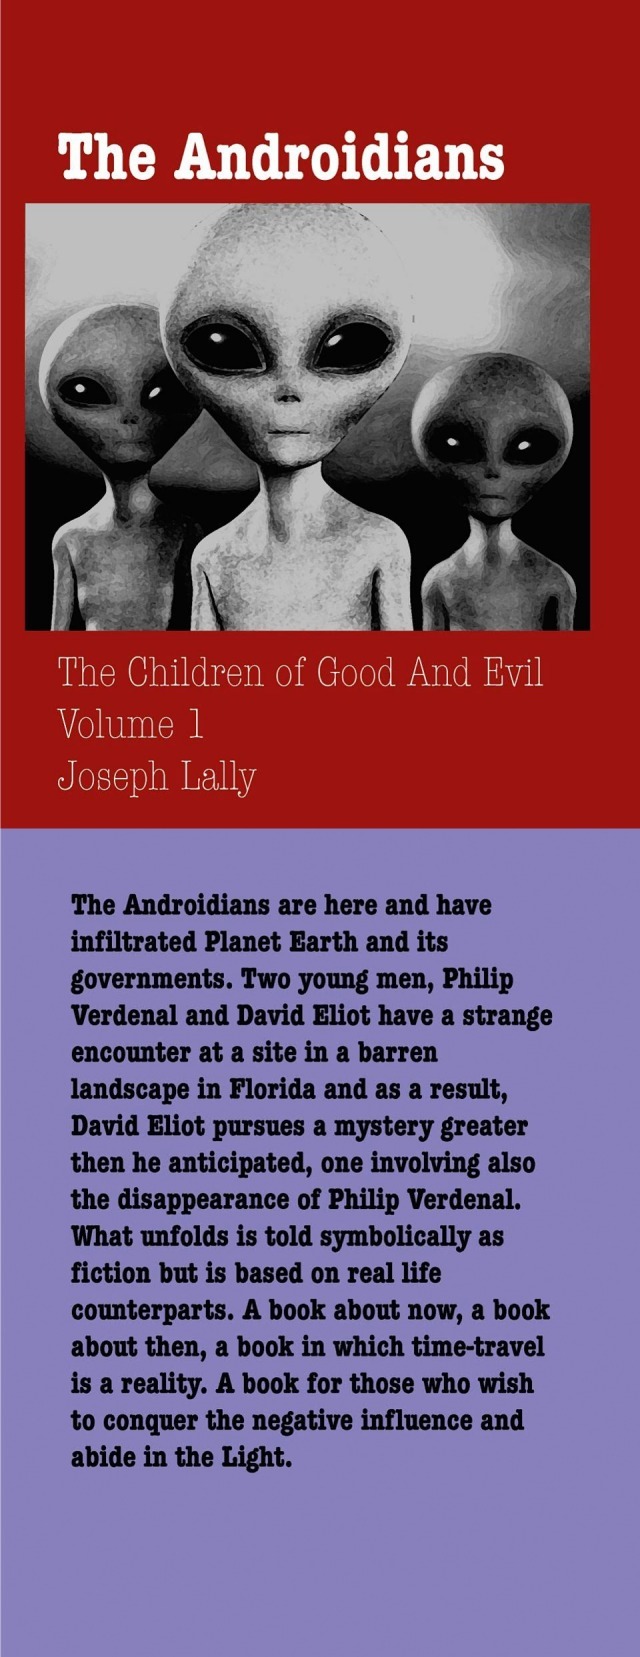 My new book, get it here: http://www.amazon.com/The-Androidians-Extraterrestrials-Children-Volume/dp/1519156898